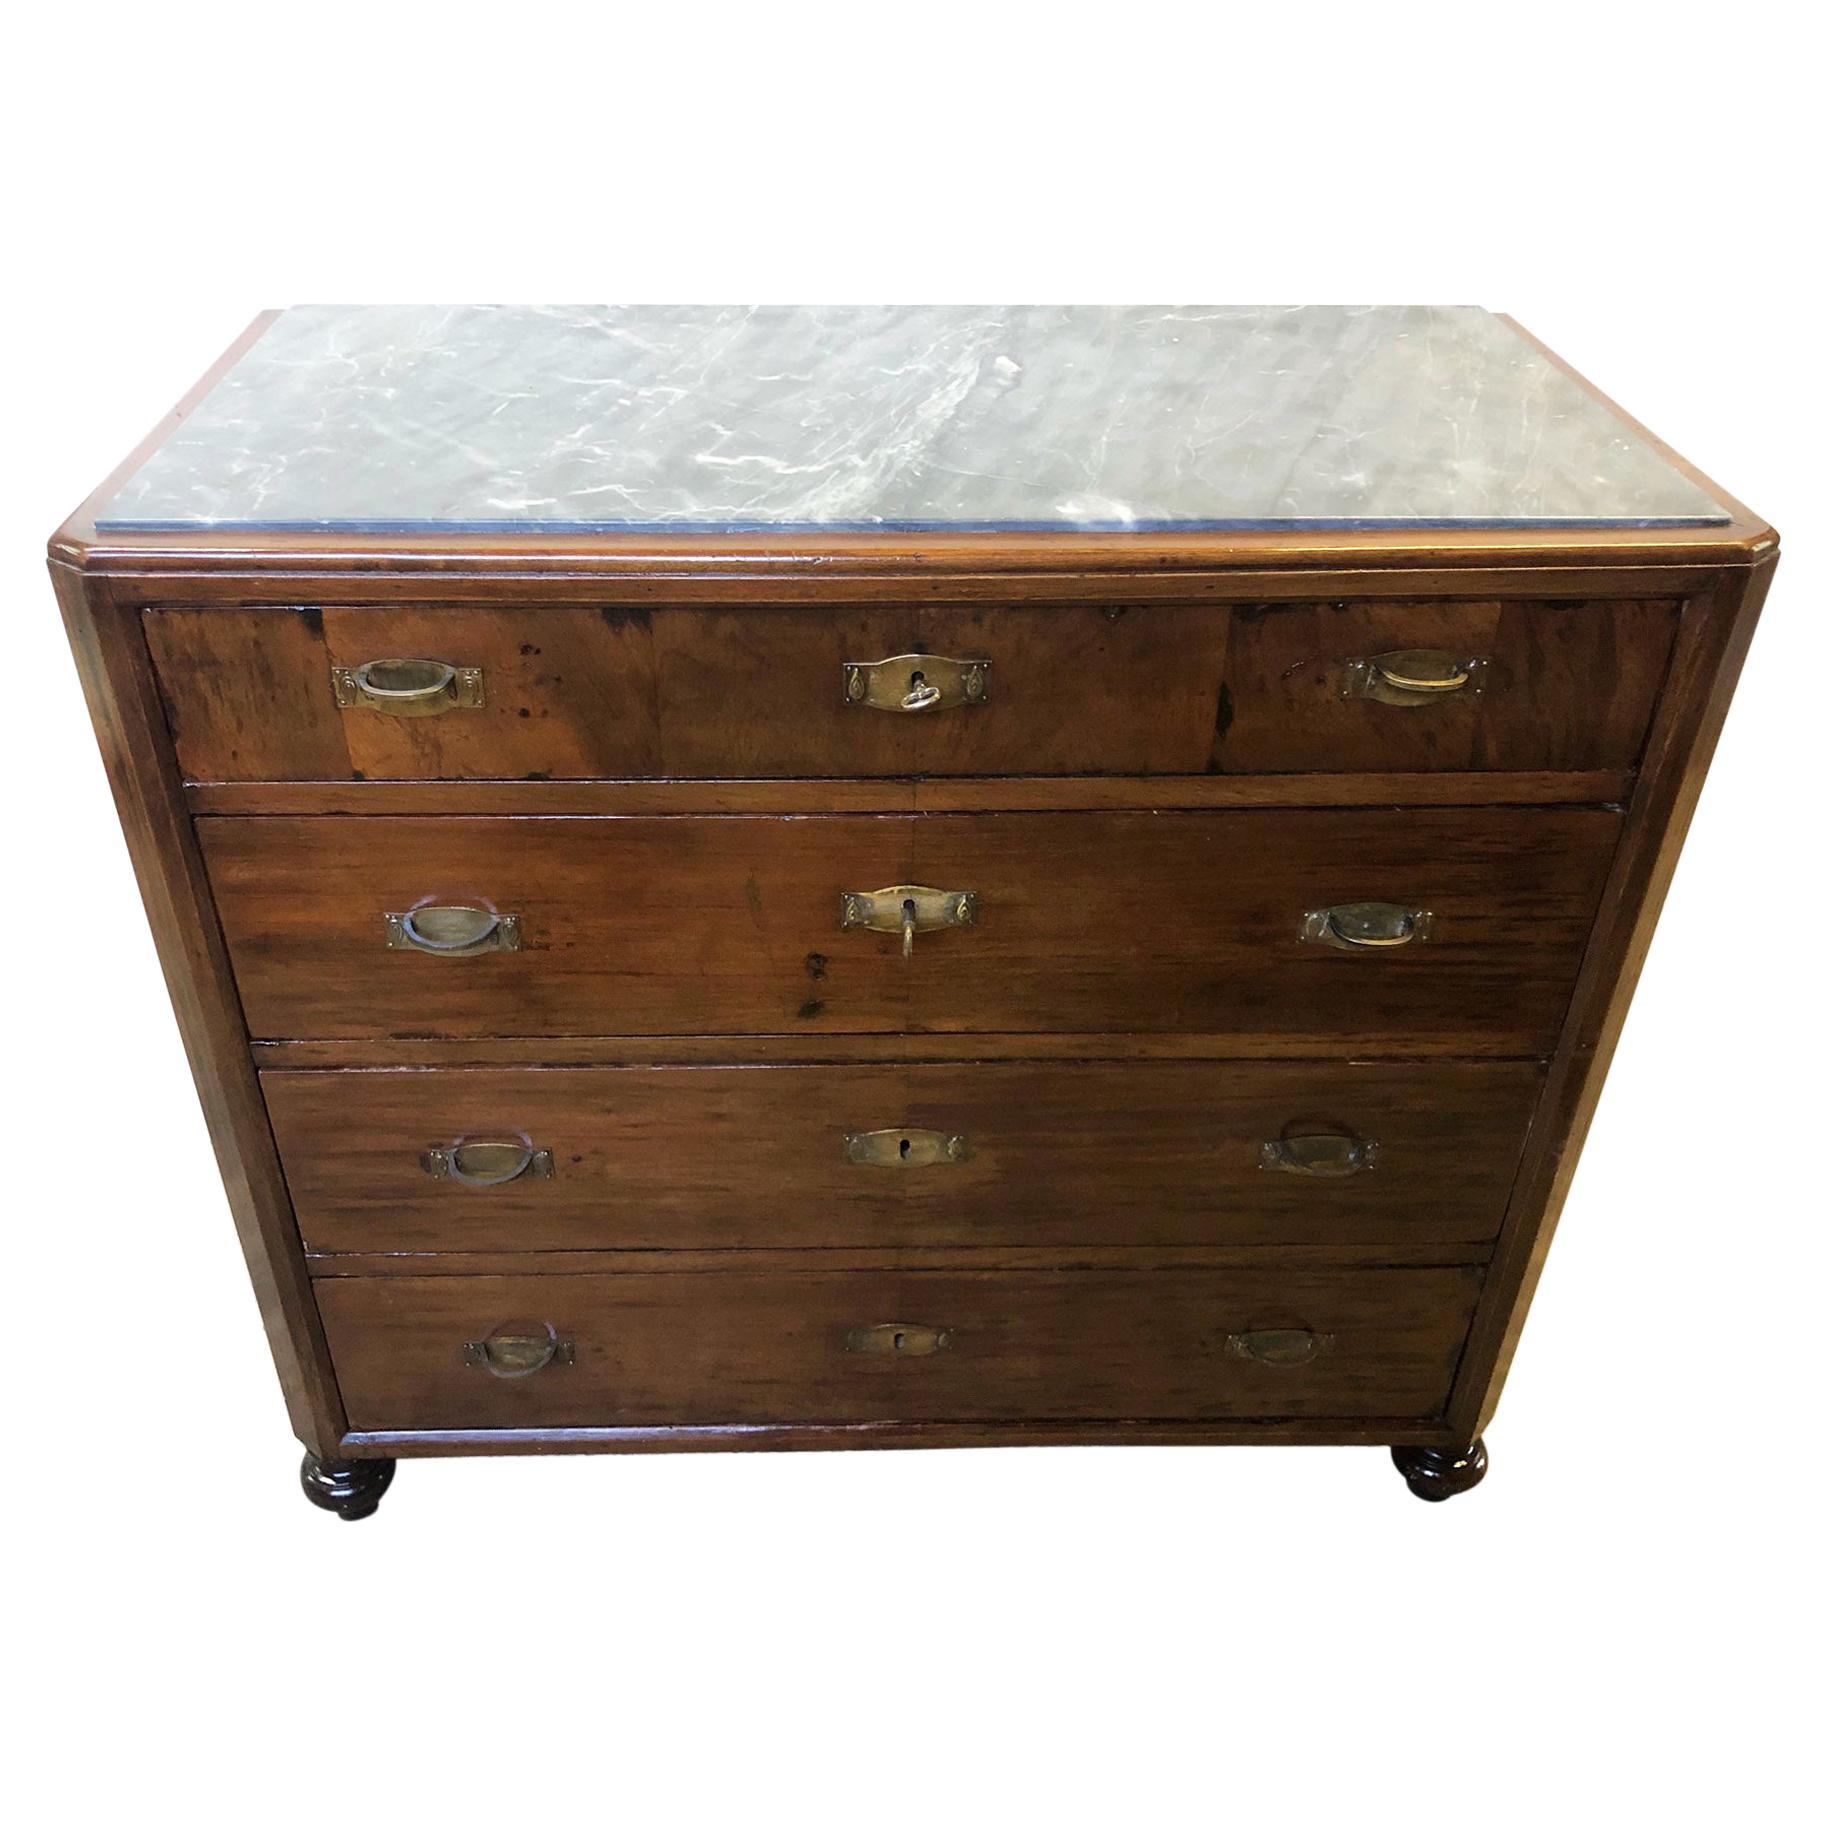 Original Italian Chest of Drawers Walnut on Fir with Four Drawers Gray Marble For Sale